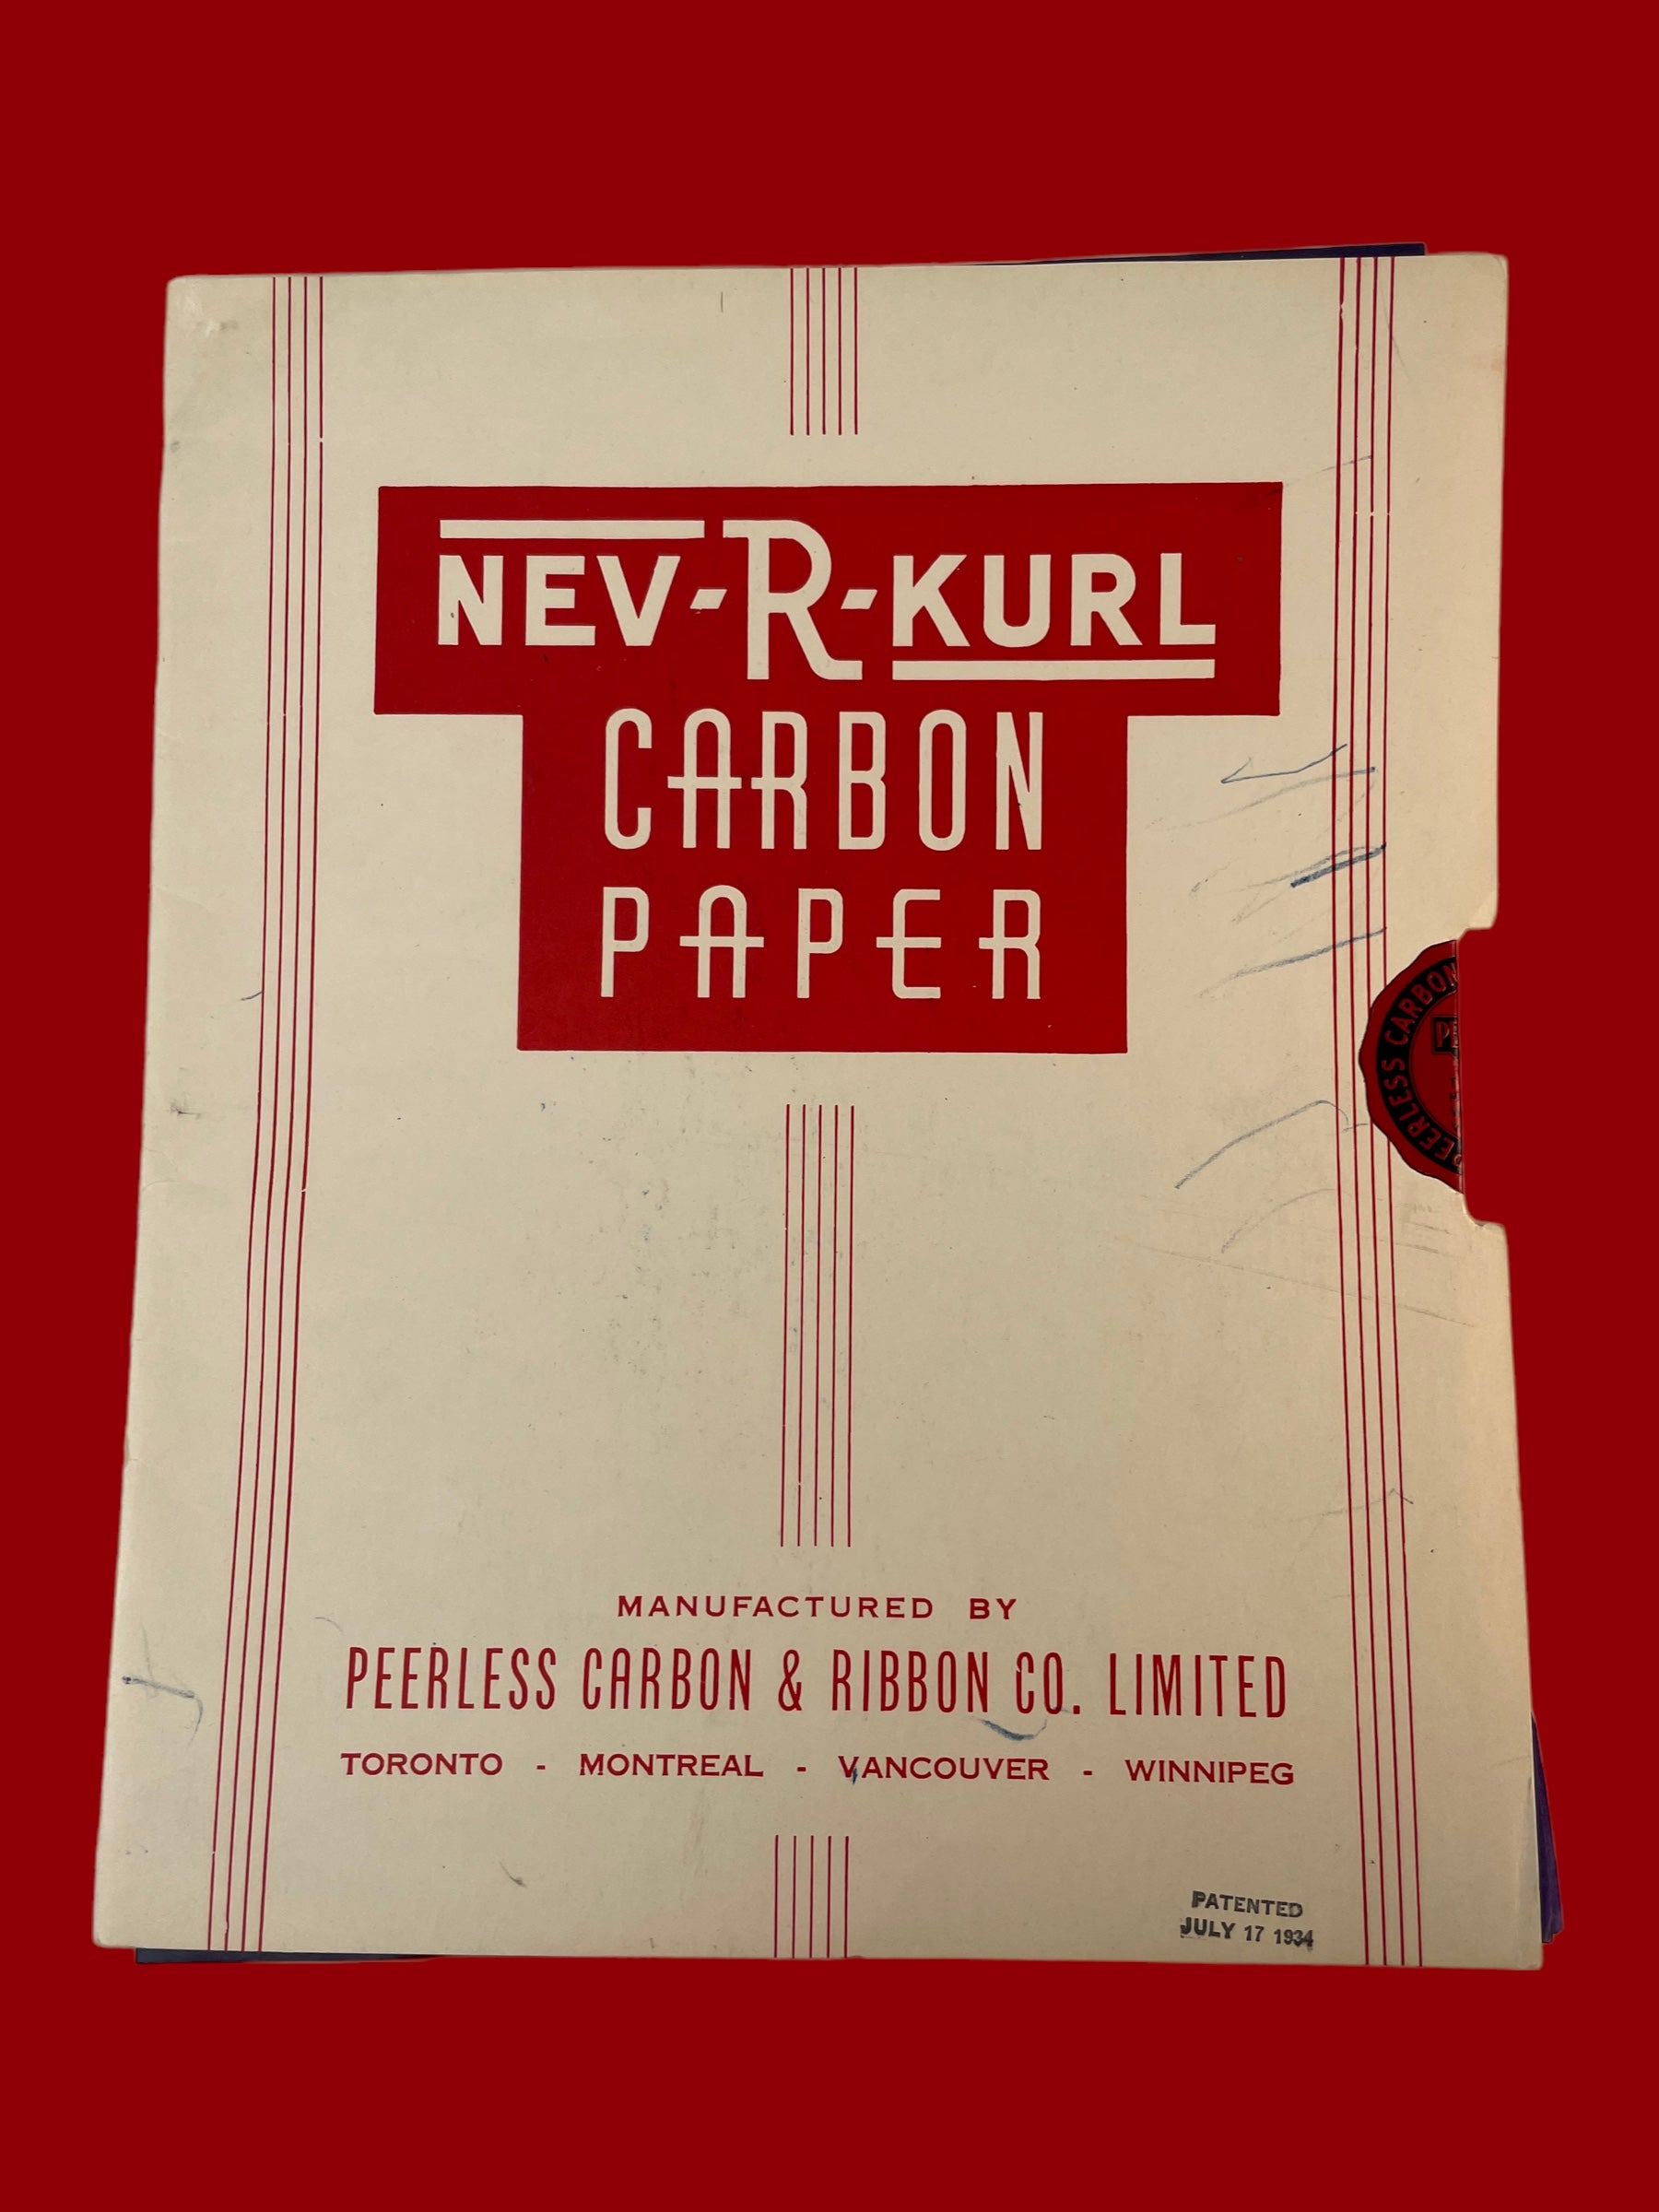 NEV-R-KURL Carbon Paper, manufactured by Peerless Carbon & Ribbon Co. Limited